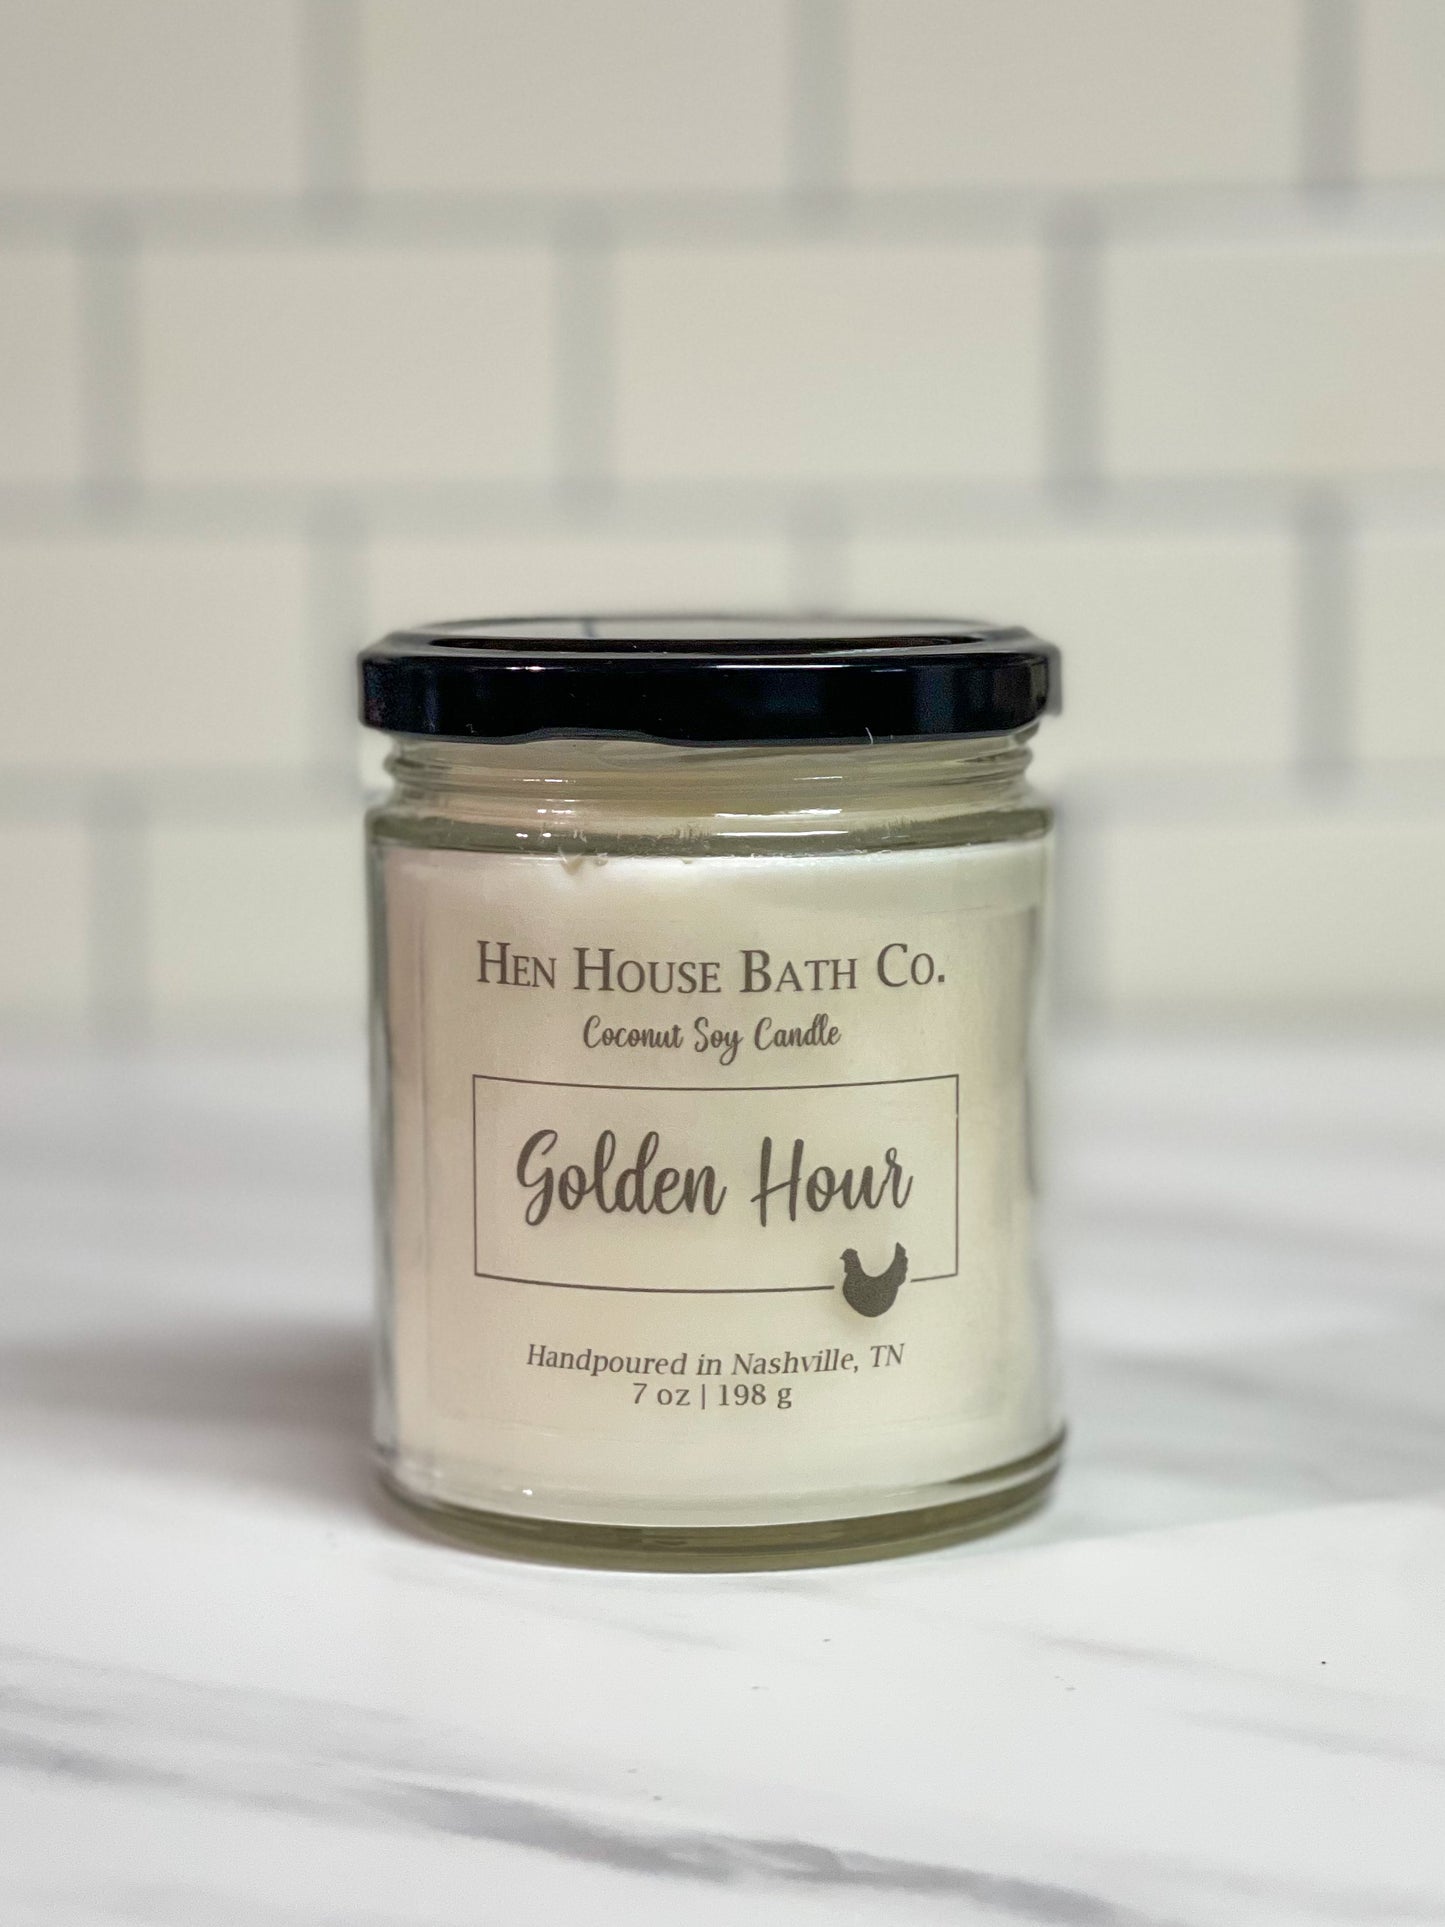 Golden Hour Coconut Soy Candle